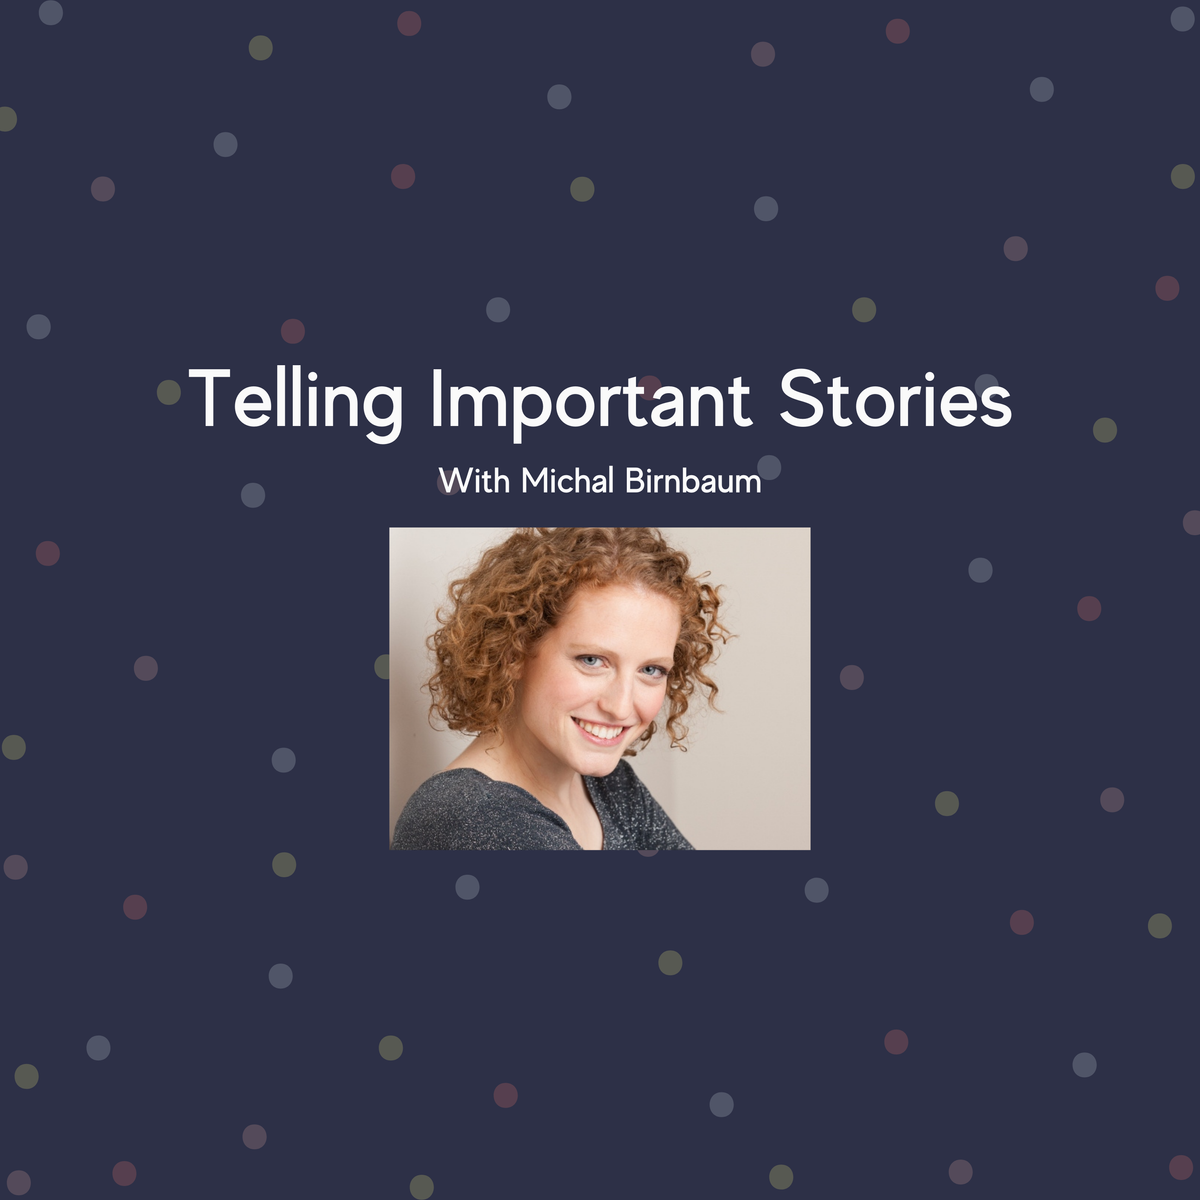 Telling Important Stories with Michal Birnbaum